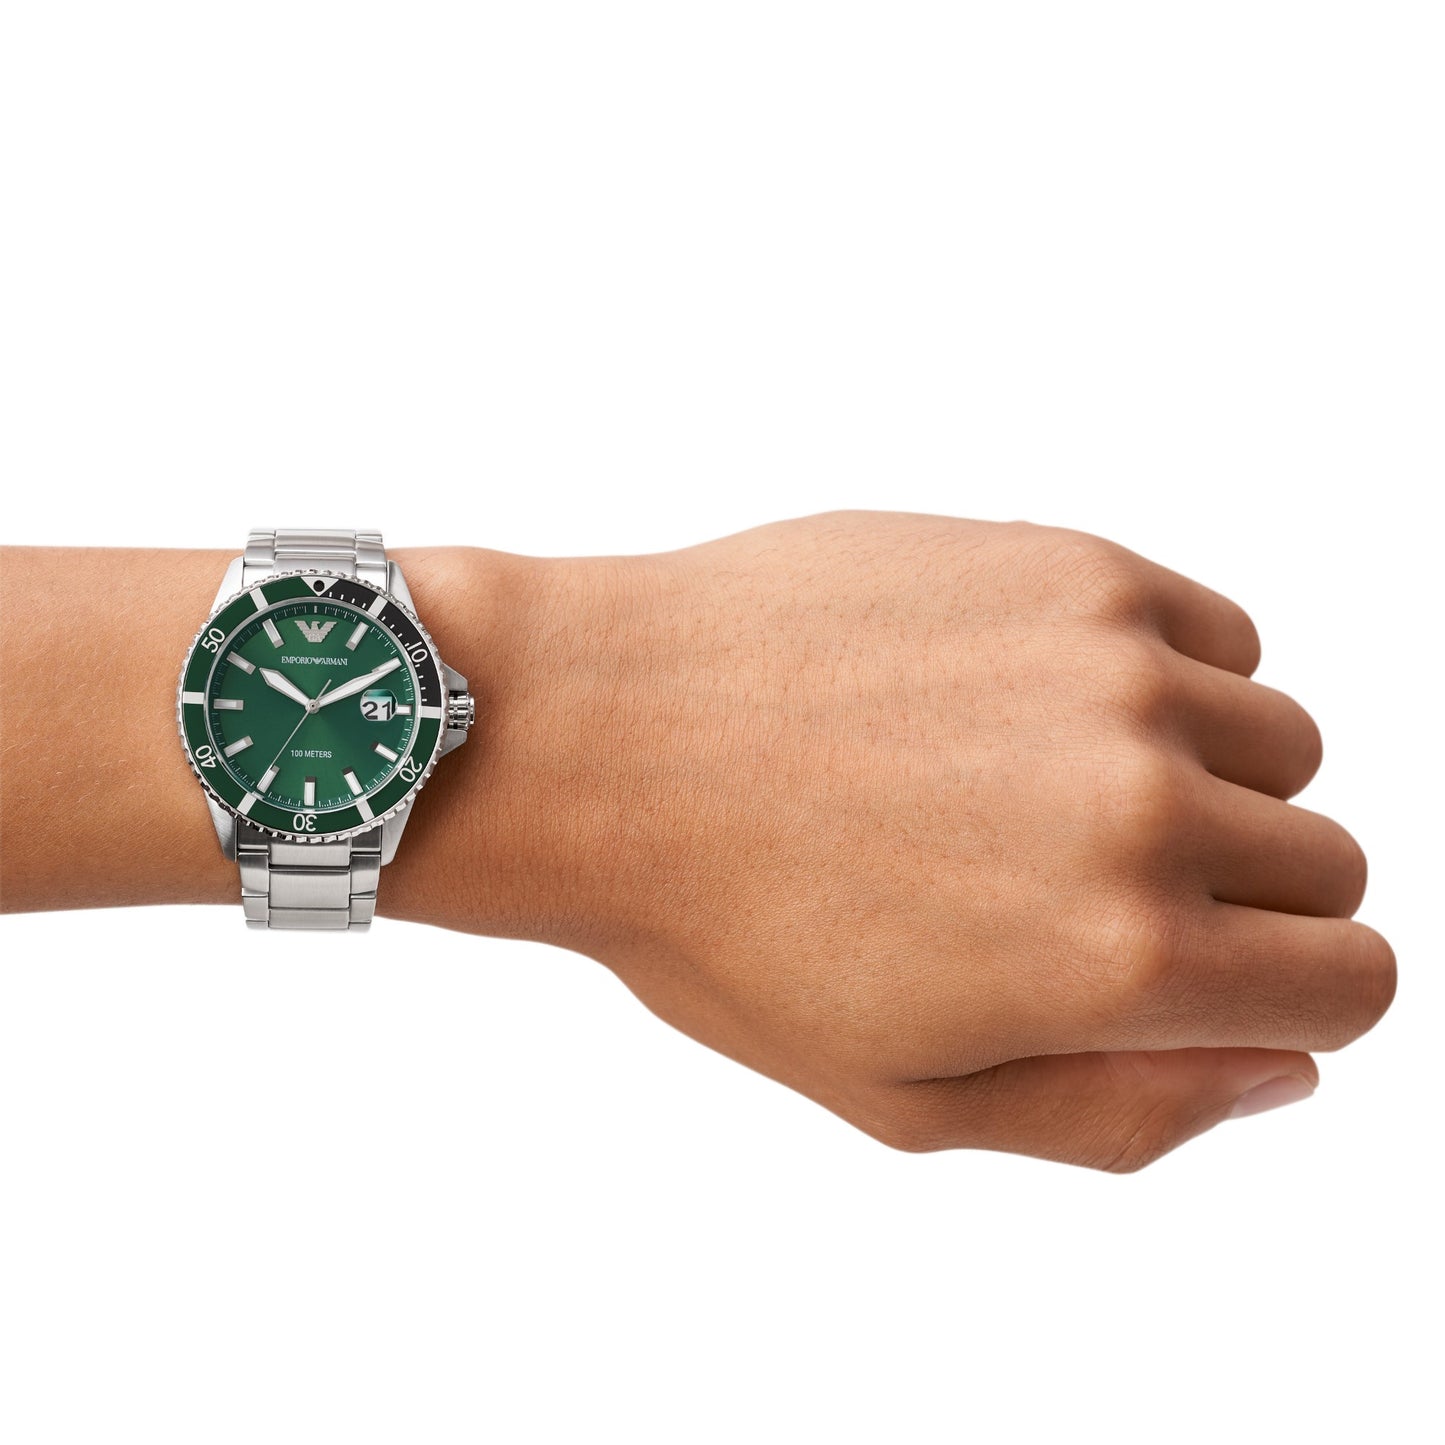 Emporio Armani 42mm Diver Green & Stainless Steel Watch